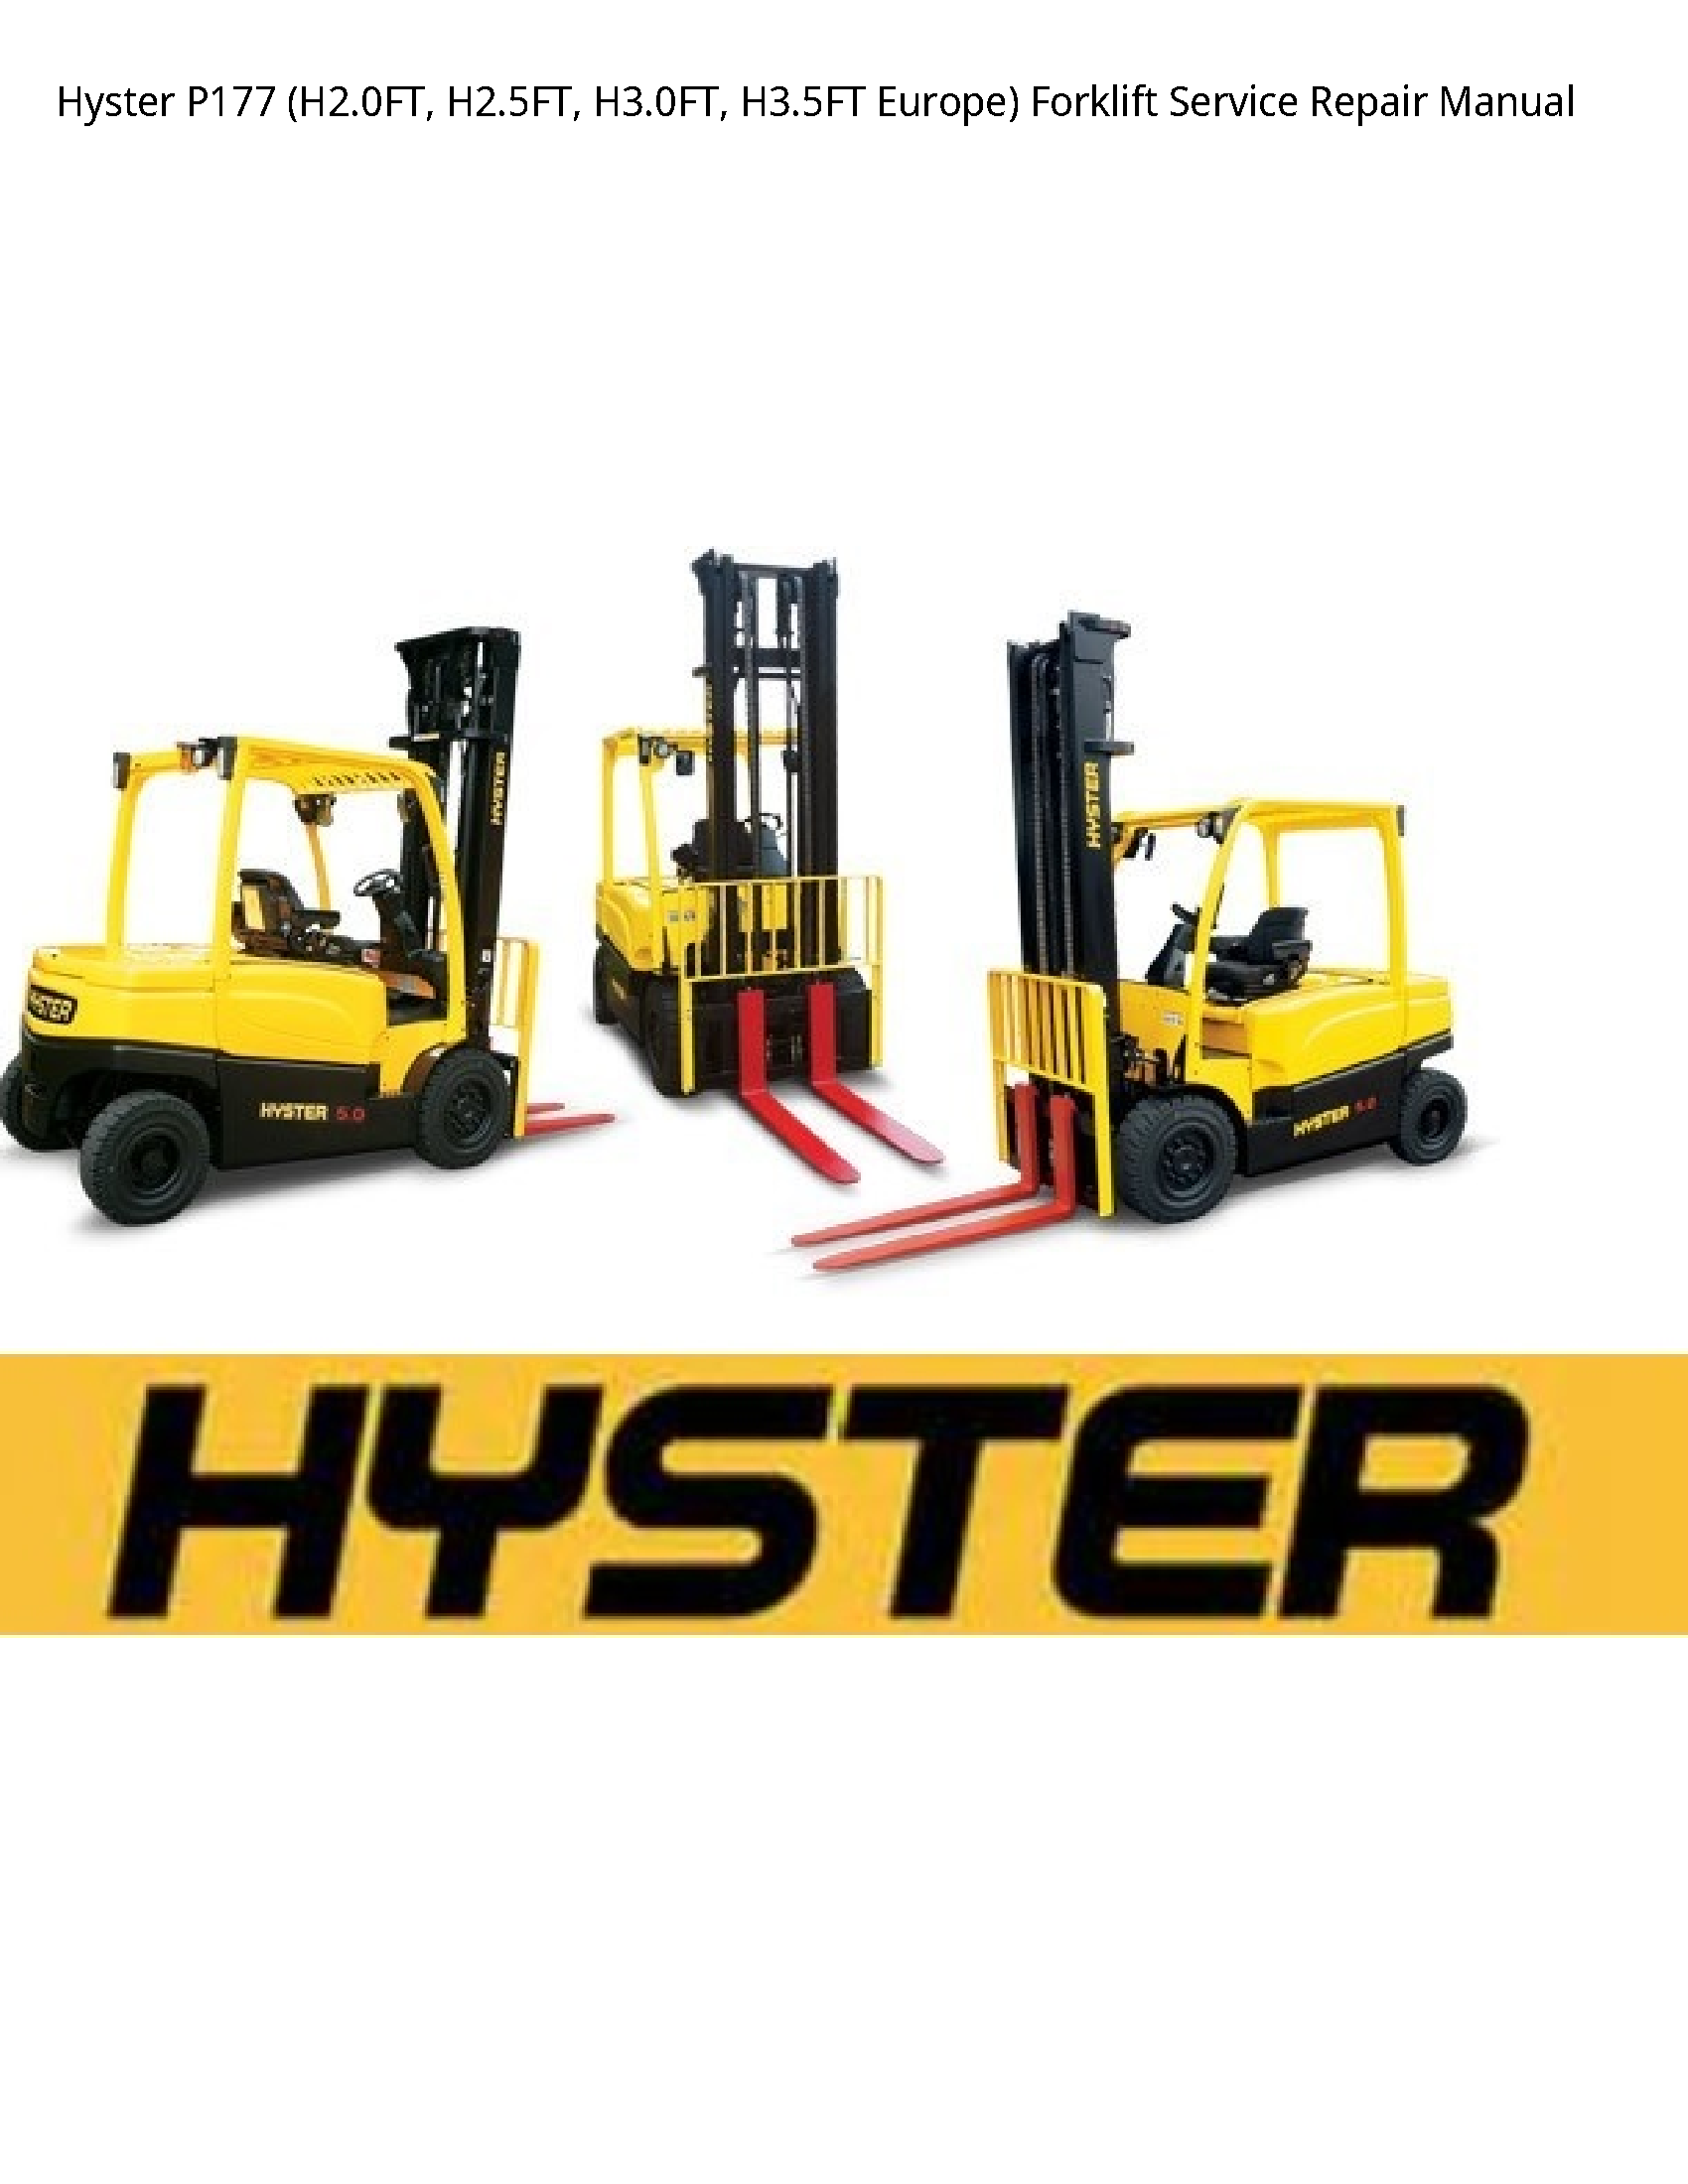 Hyster P177 Europe) Forklift manual